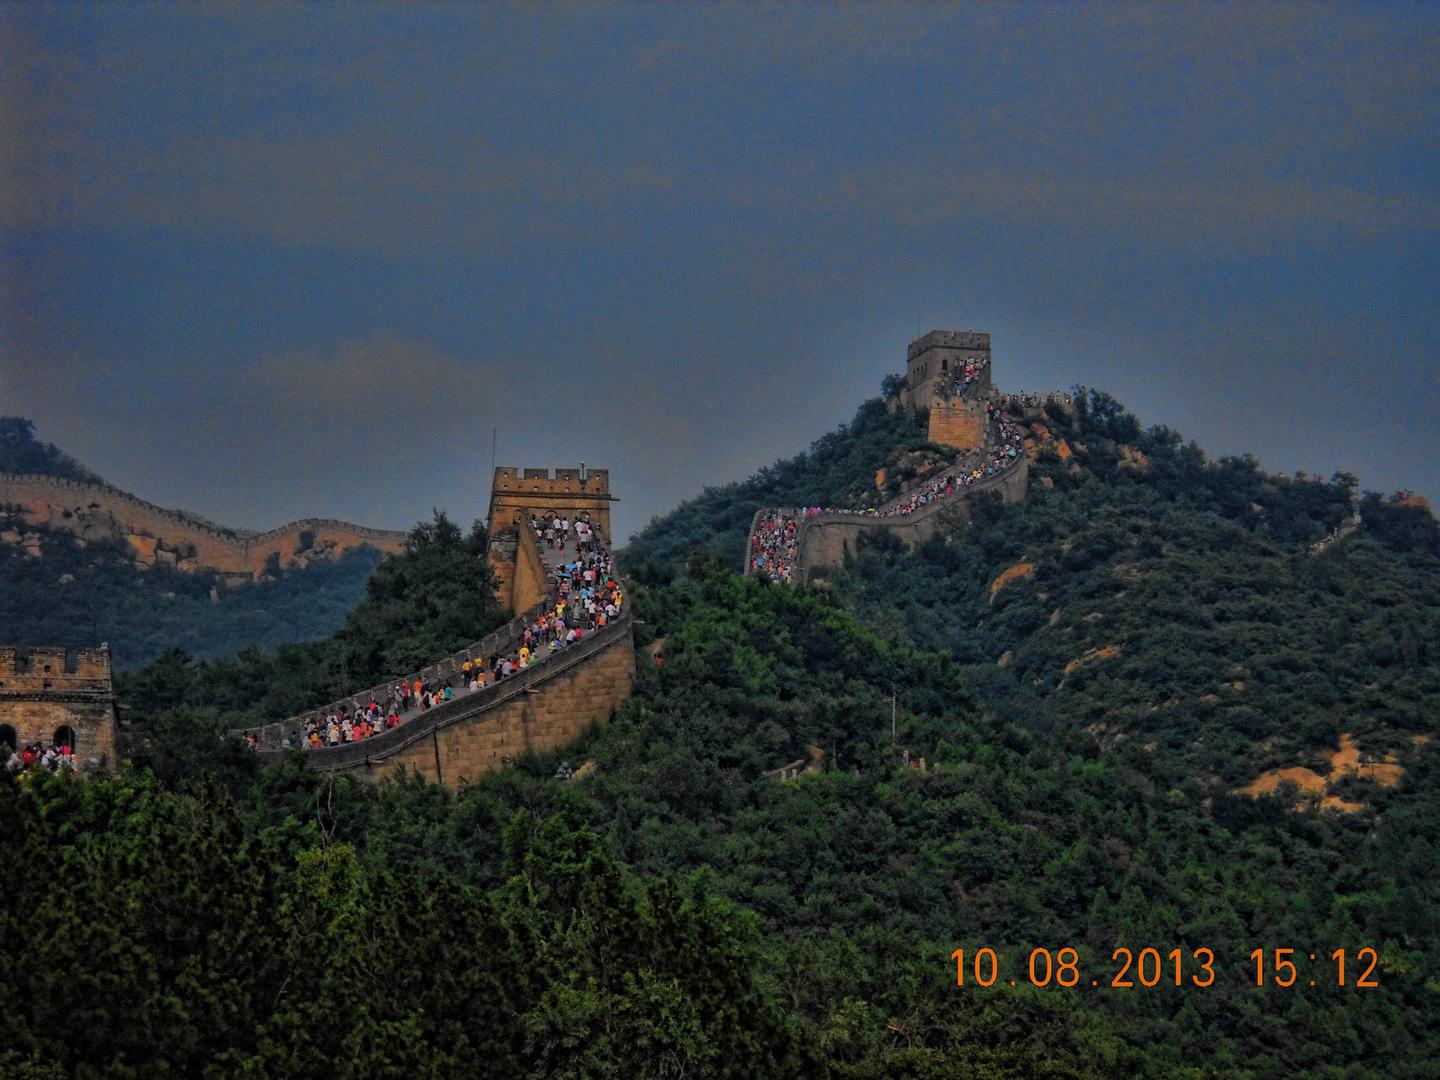 Distant view of the wall